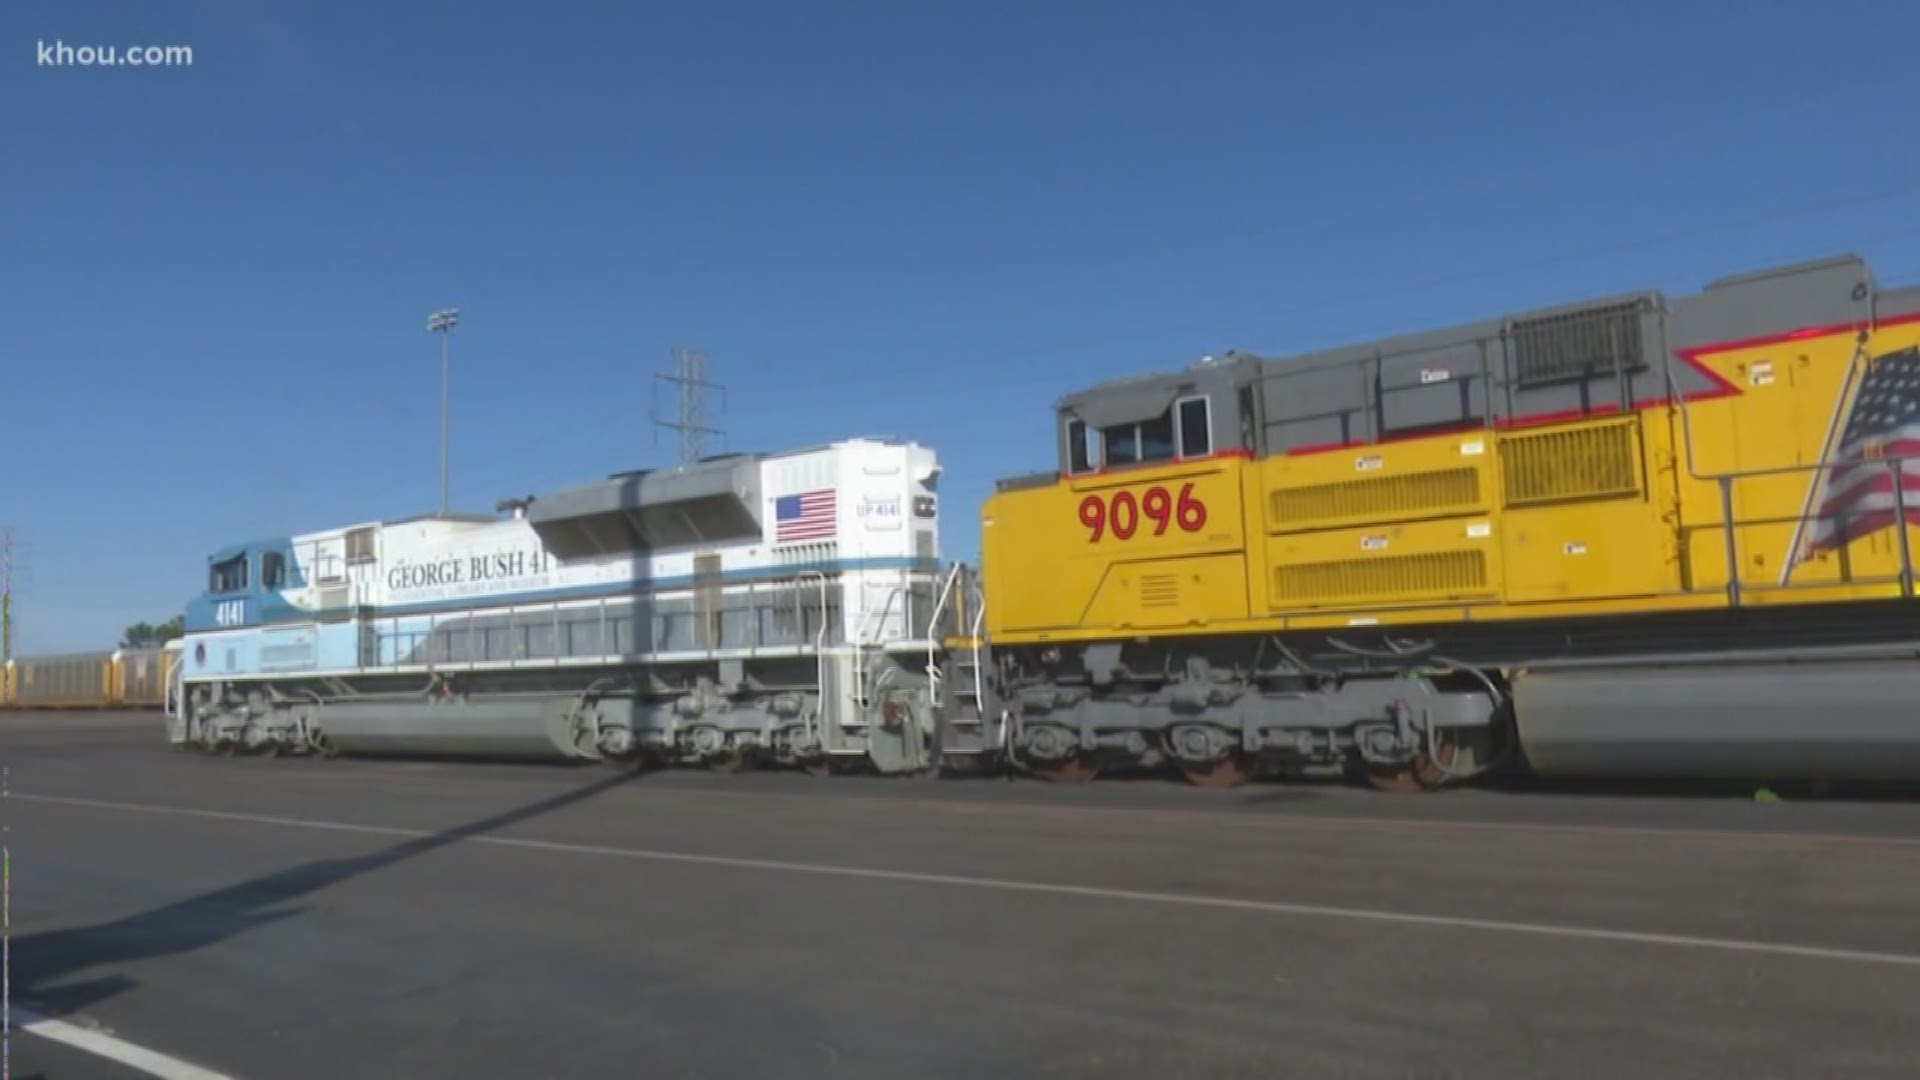 President George H.W. Bush's body will be transported to College Station by the custom-painted Bush 4141 engine. In 2005, Union Pacific unveiled Bush 4141 at the George H.W. Bush Library.